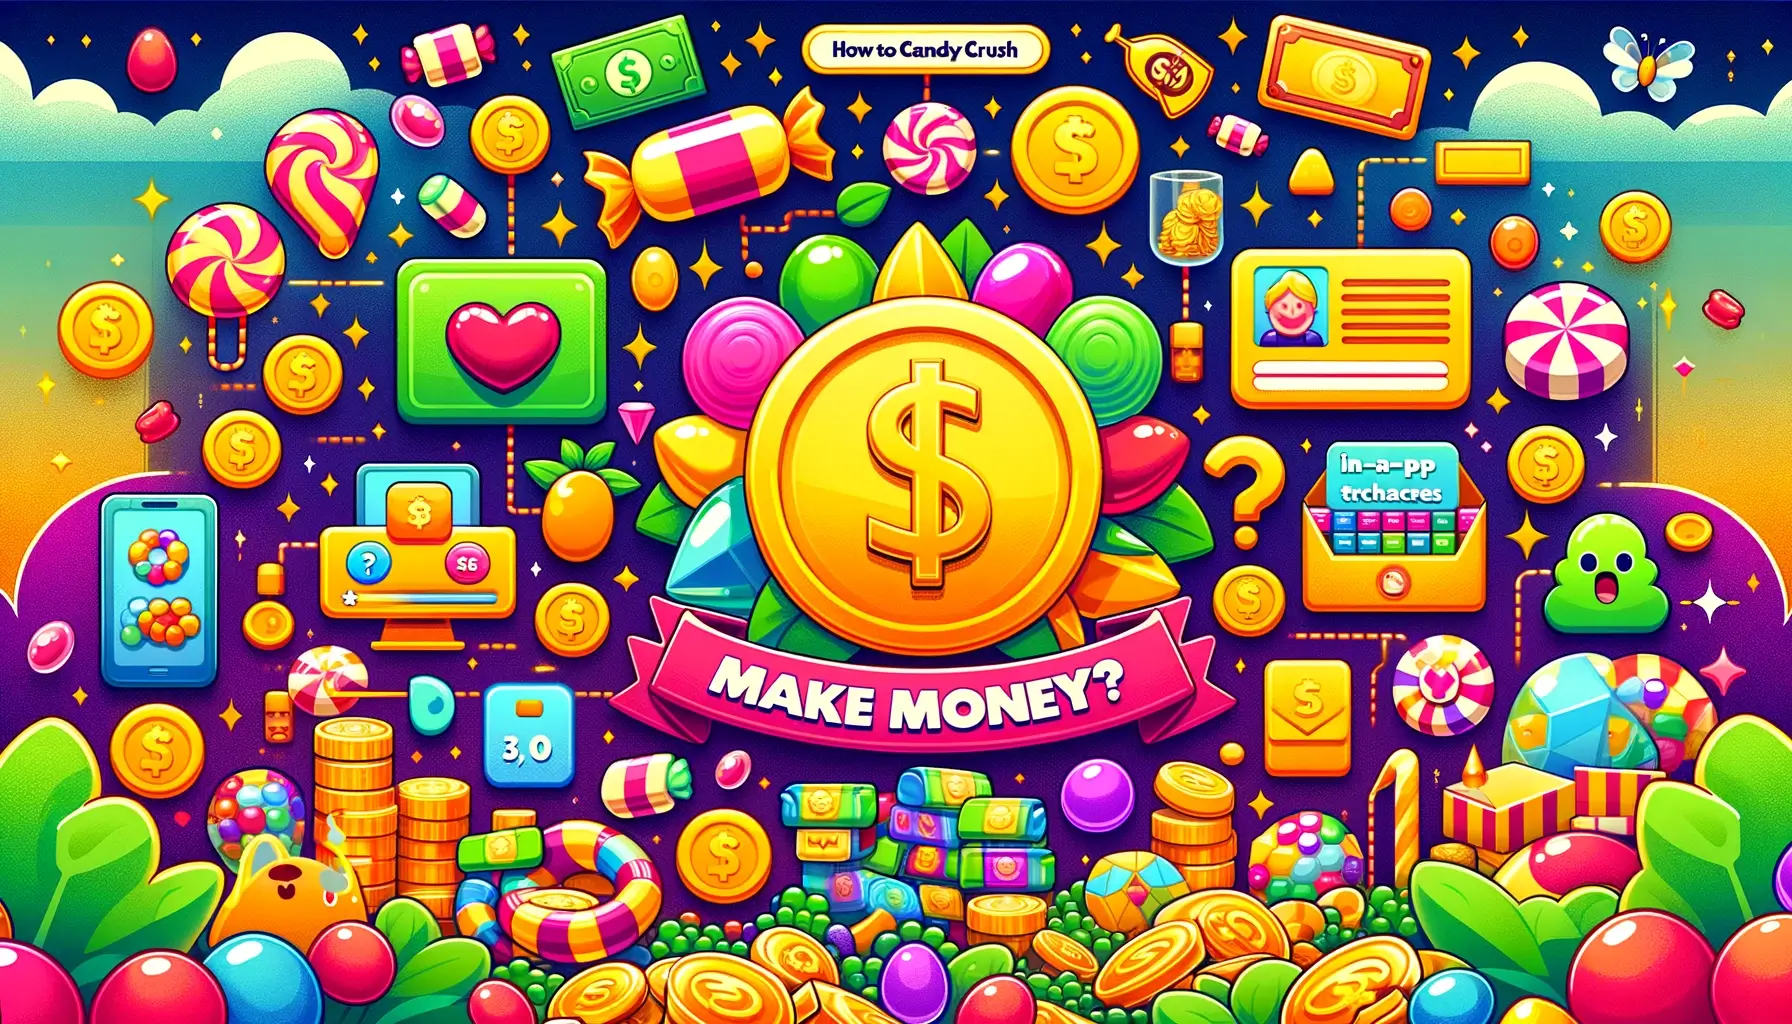 Deep-Dive: How Does Candy Crush Make Money?